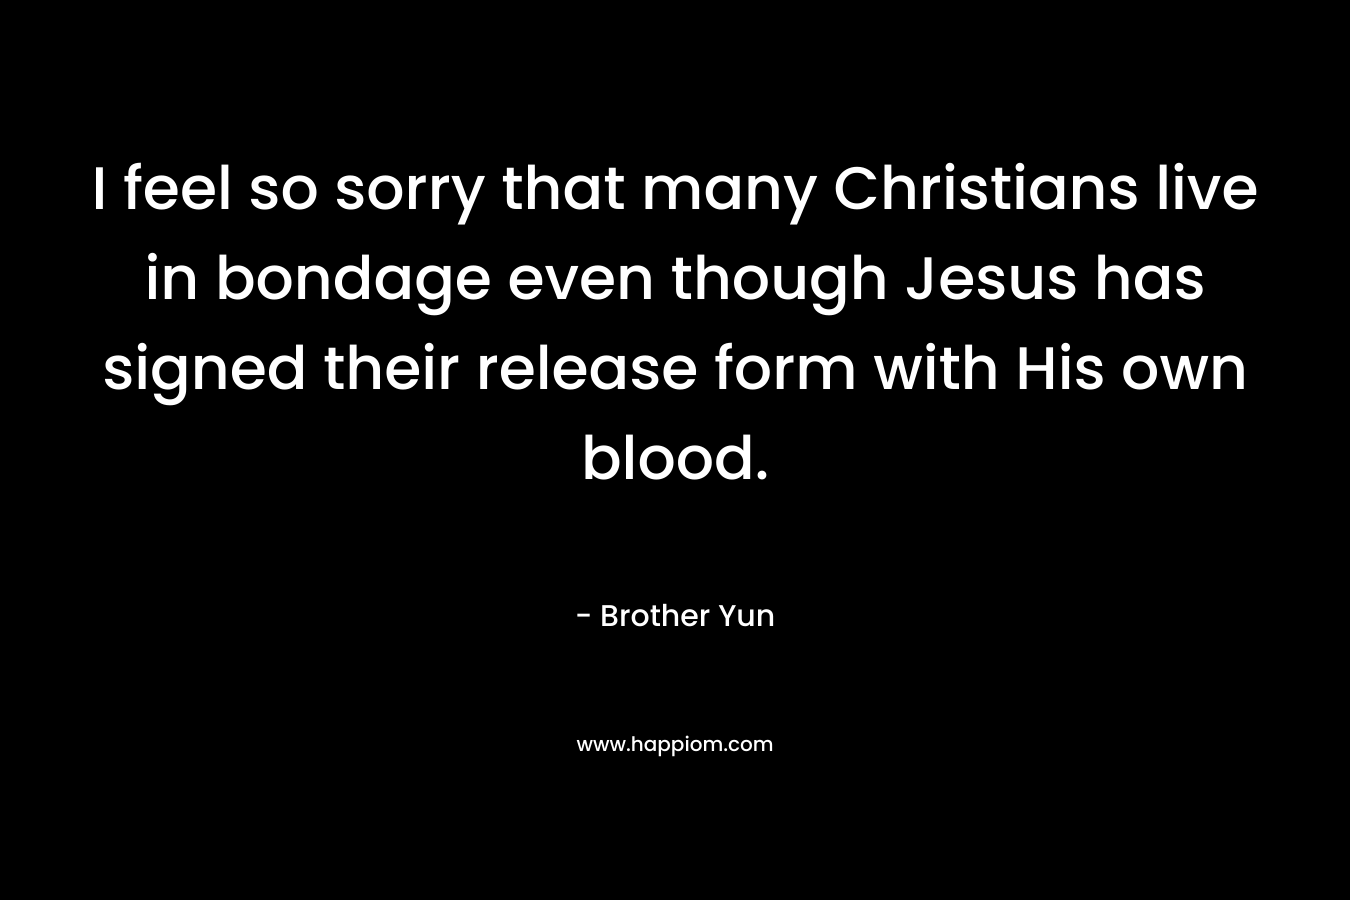 I feel so sorry that many Christians live in bondage even though Jesus has signed their release form with His own blood. – Brother Yun